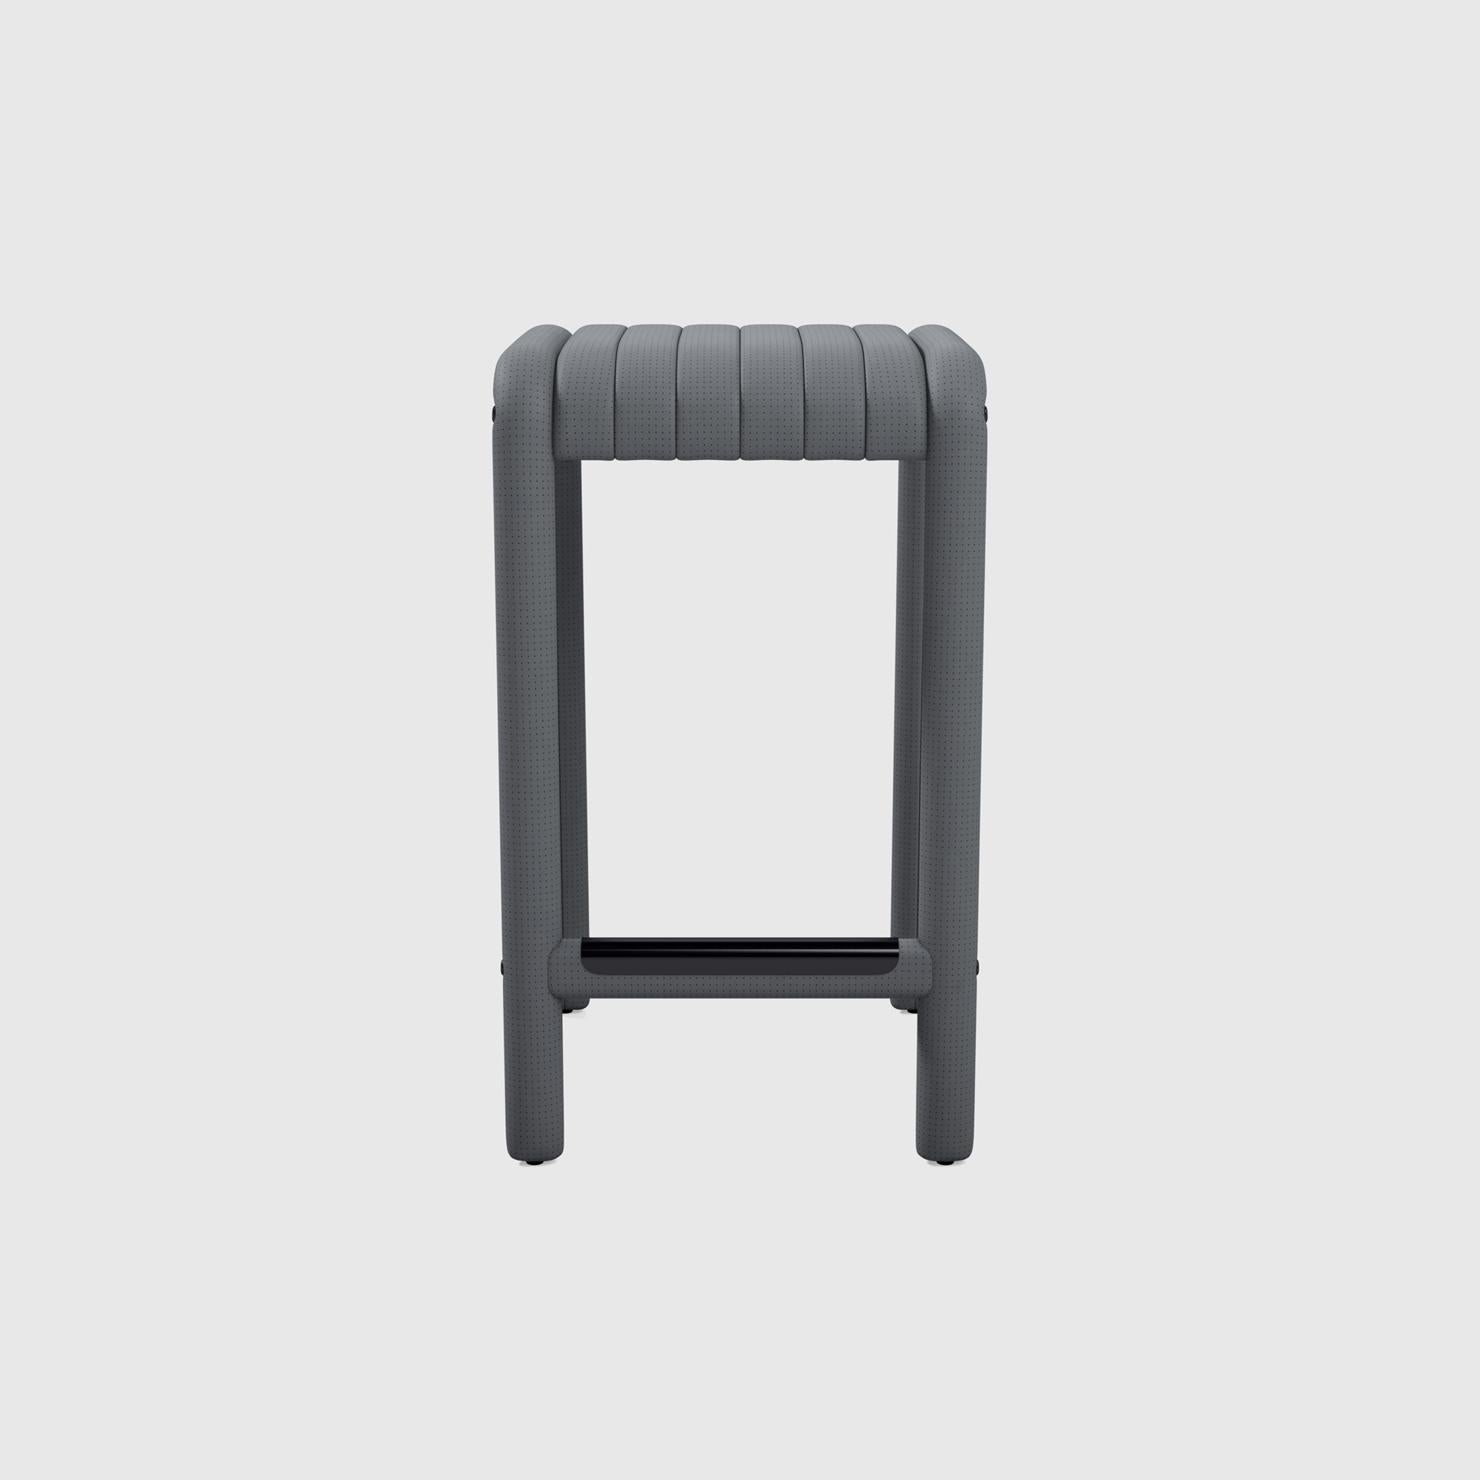 The Alexander Street counter stool by Philippe Malouin evokes the leather sports seats of iconic sports cars of the 1980s he grew up with on Alexander Street in Montreal. Ribbed and perforated leather is hand-stitched over the entire piece. The